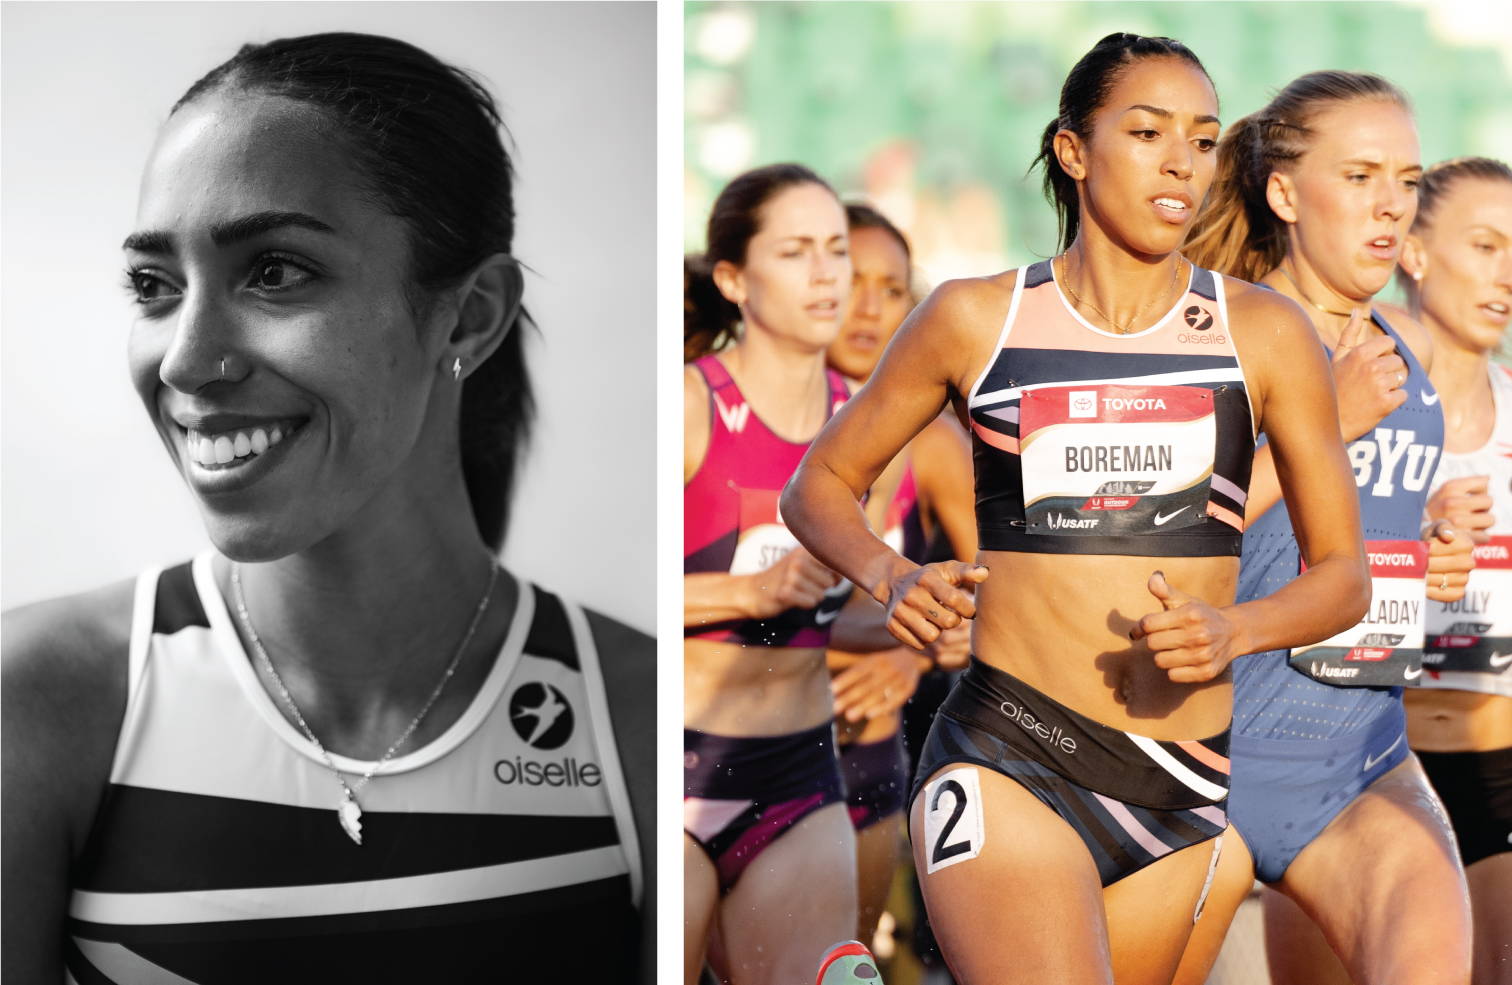 Left: Portrait of Madie Boreman in a Oiselle uniform. Right: Madie racing the steeplechase